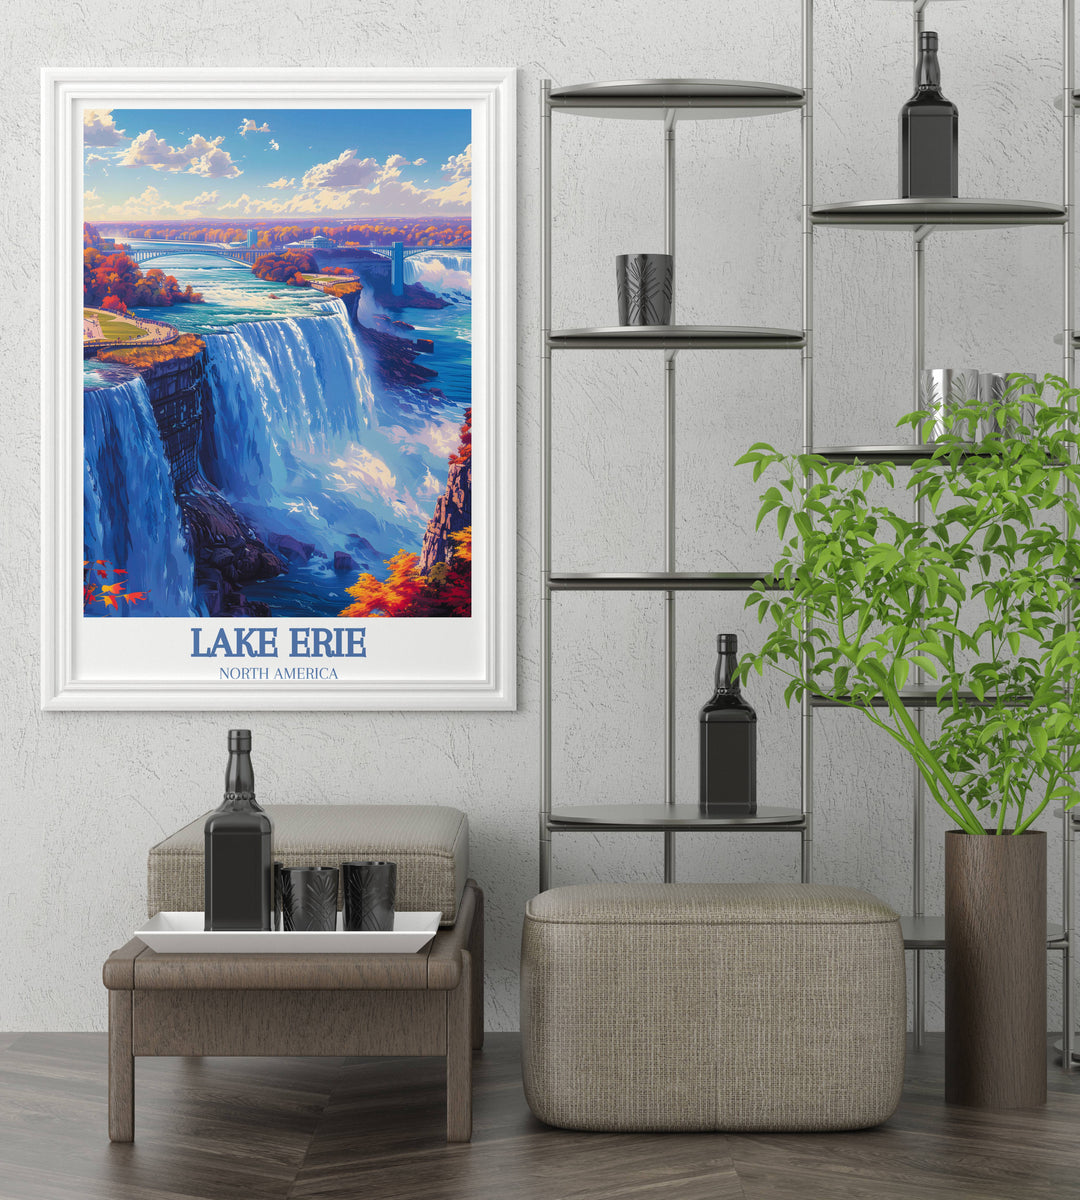 Digital download available for Lake Erie photo, easy and fast way to decorate with stunning lake scenery.